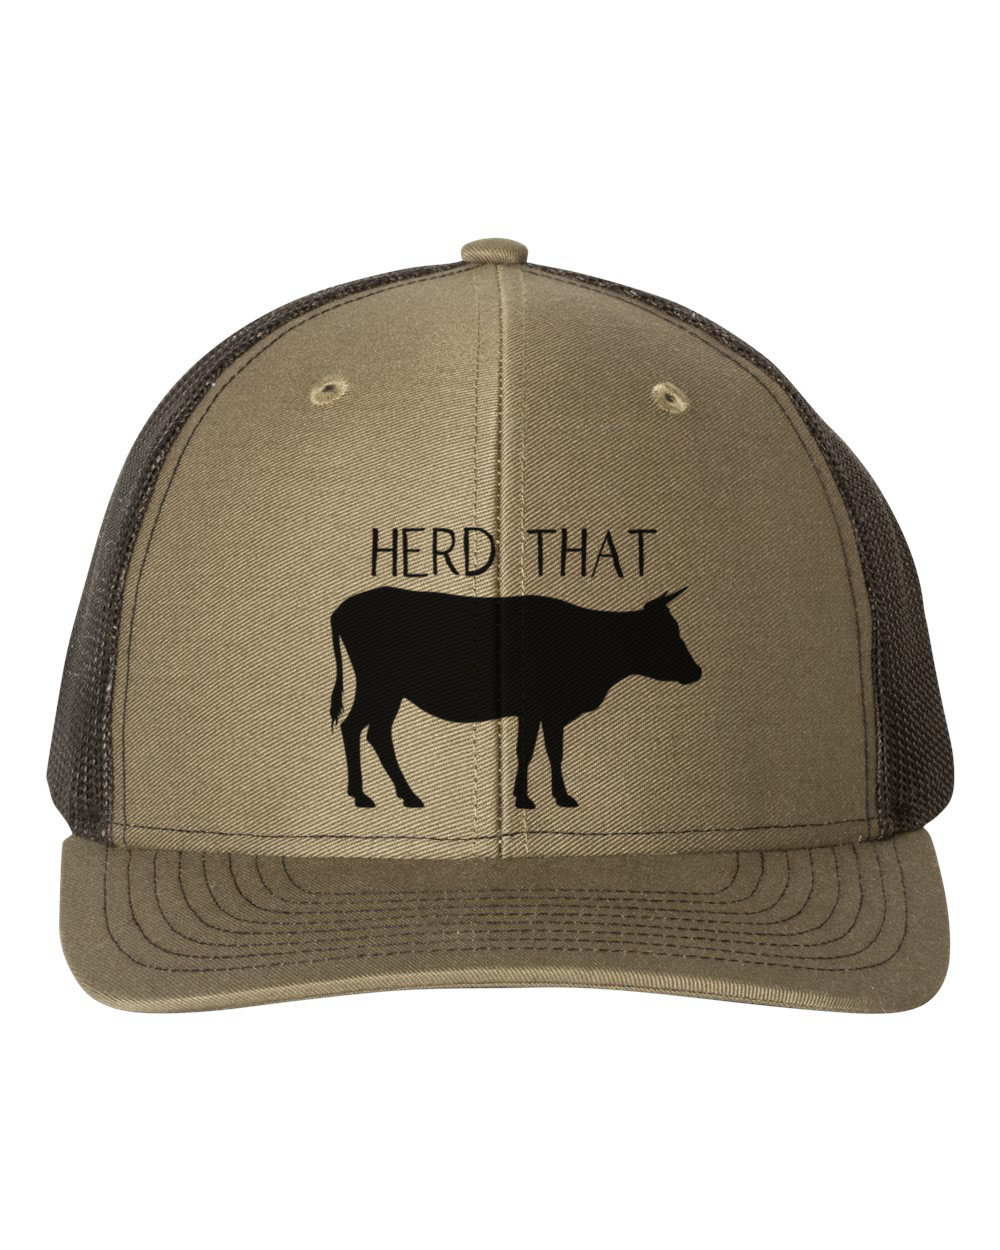 Cattle Hat, Herd That, Dairy Cattle, Beef Hat, Cattle Farmer Hat, Farm Hat, Trucker Hat, Baseball Cap, 10 Color Options!, Cows, Black Text, Loden/Black - image 1 of 1